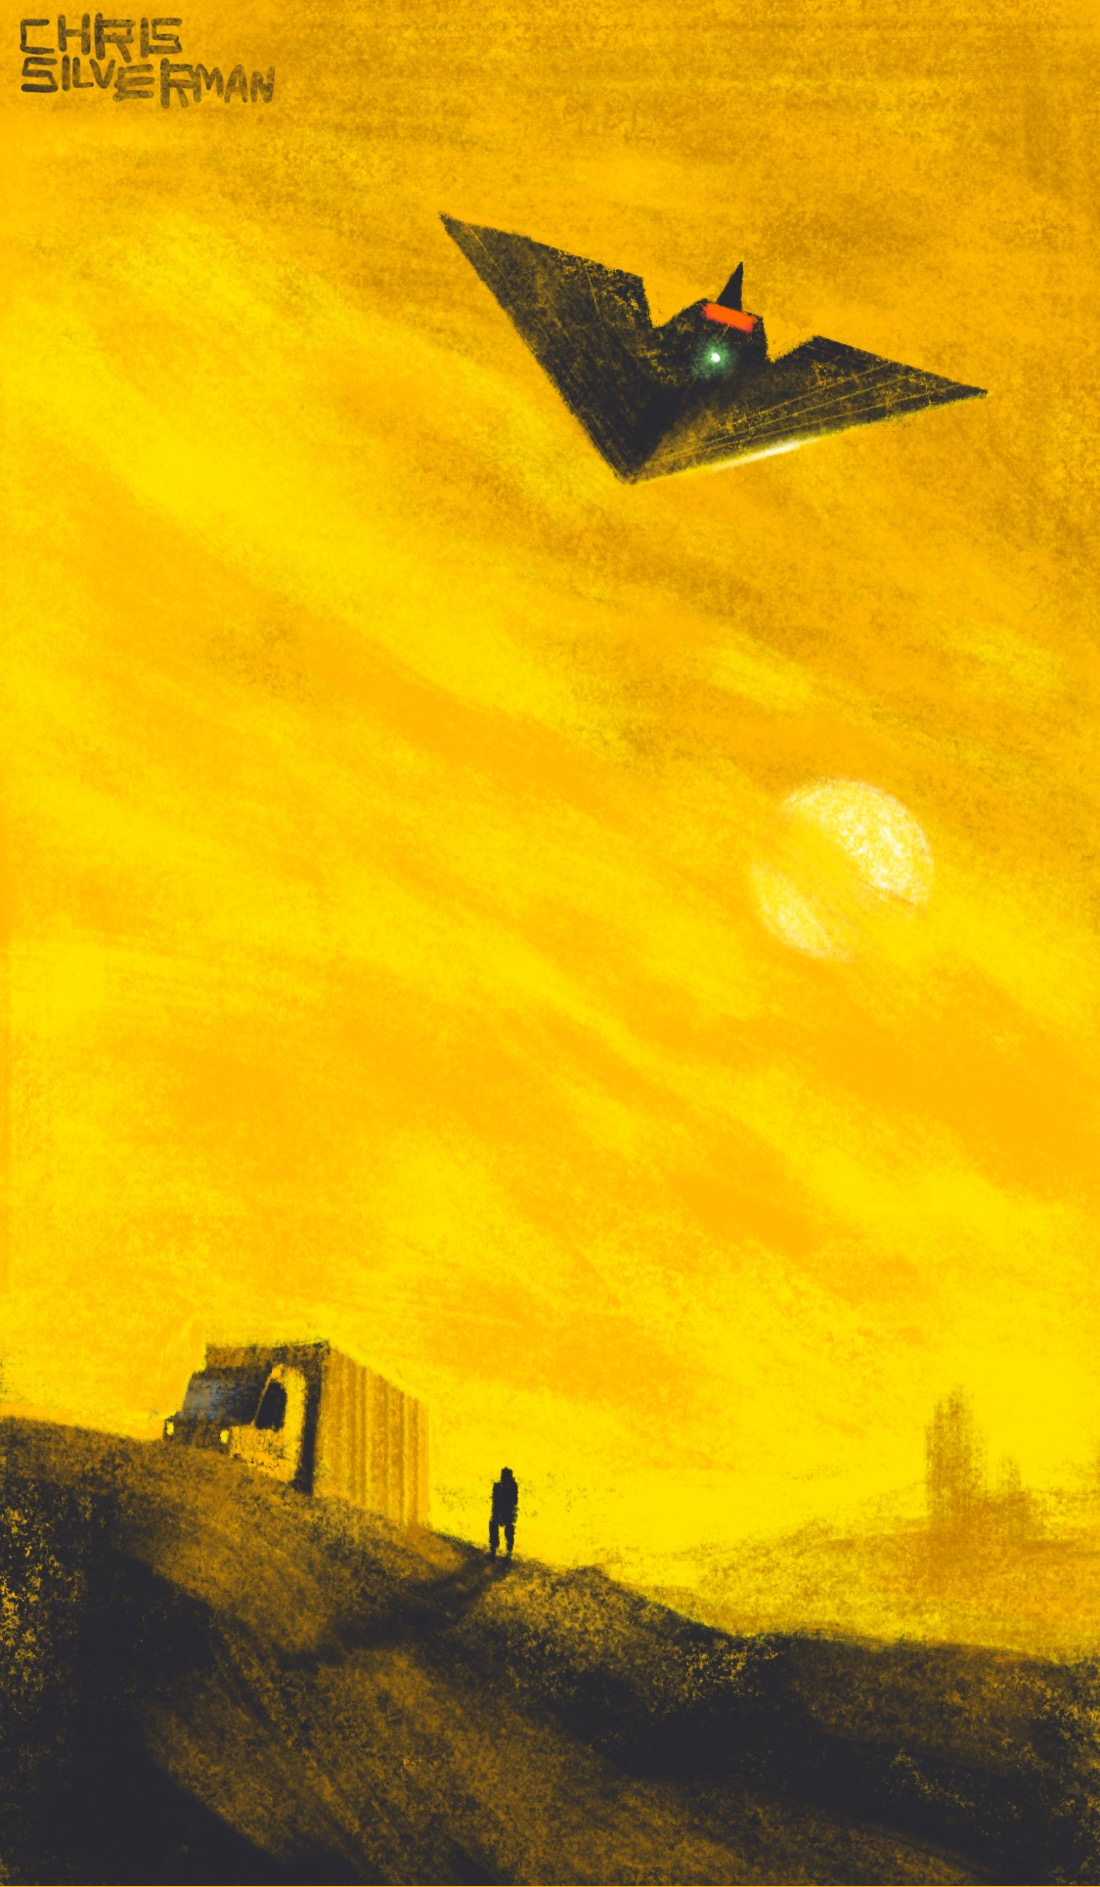 A desert scene, late afternoon: a golden sky with clouds scattered across it, and a partially concealed sun. A truck is parked in the middle of a barren rise, the driver standing next to it, casting a long shadow. Visible in the distance is the hazy brown shape of a natural rock formation. Flying overhead is a black triangular aircraft seen from the rear, the red glow of the engine visible and a bright green light on the underside.